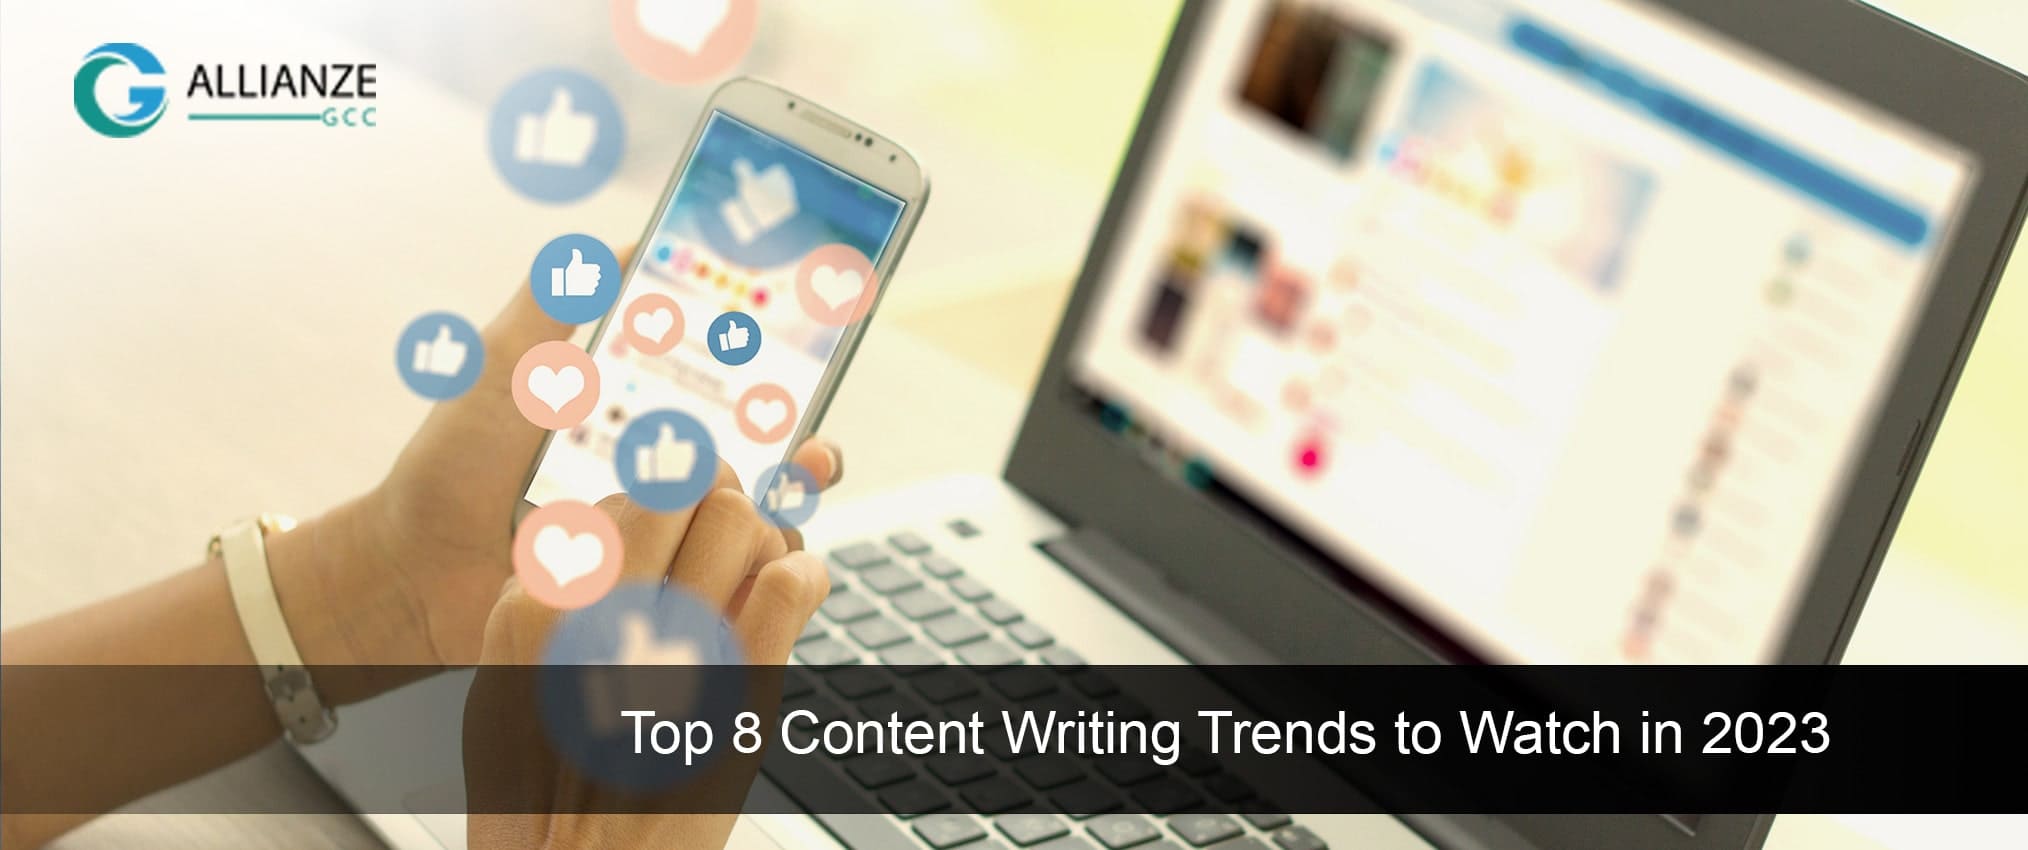 Top 8 Content Writing Trends to Watch in 2023